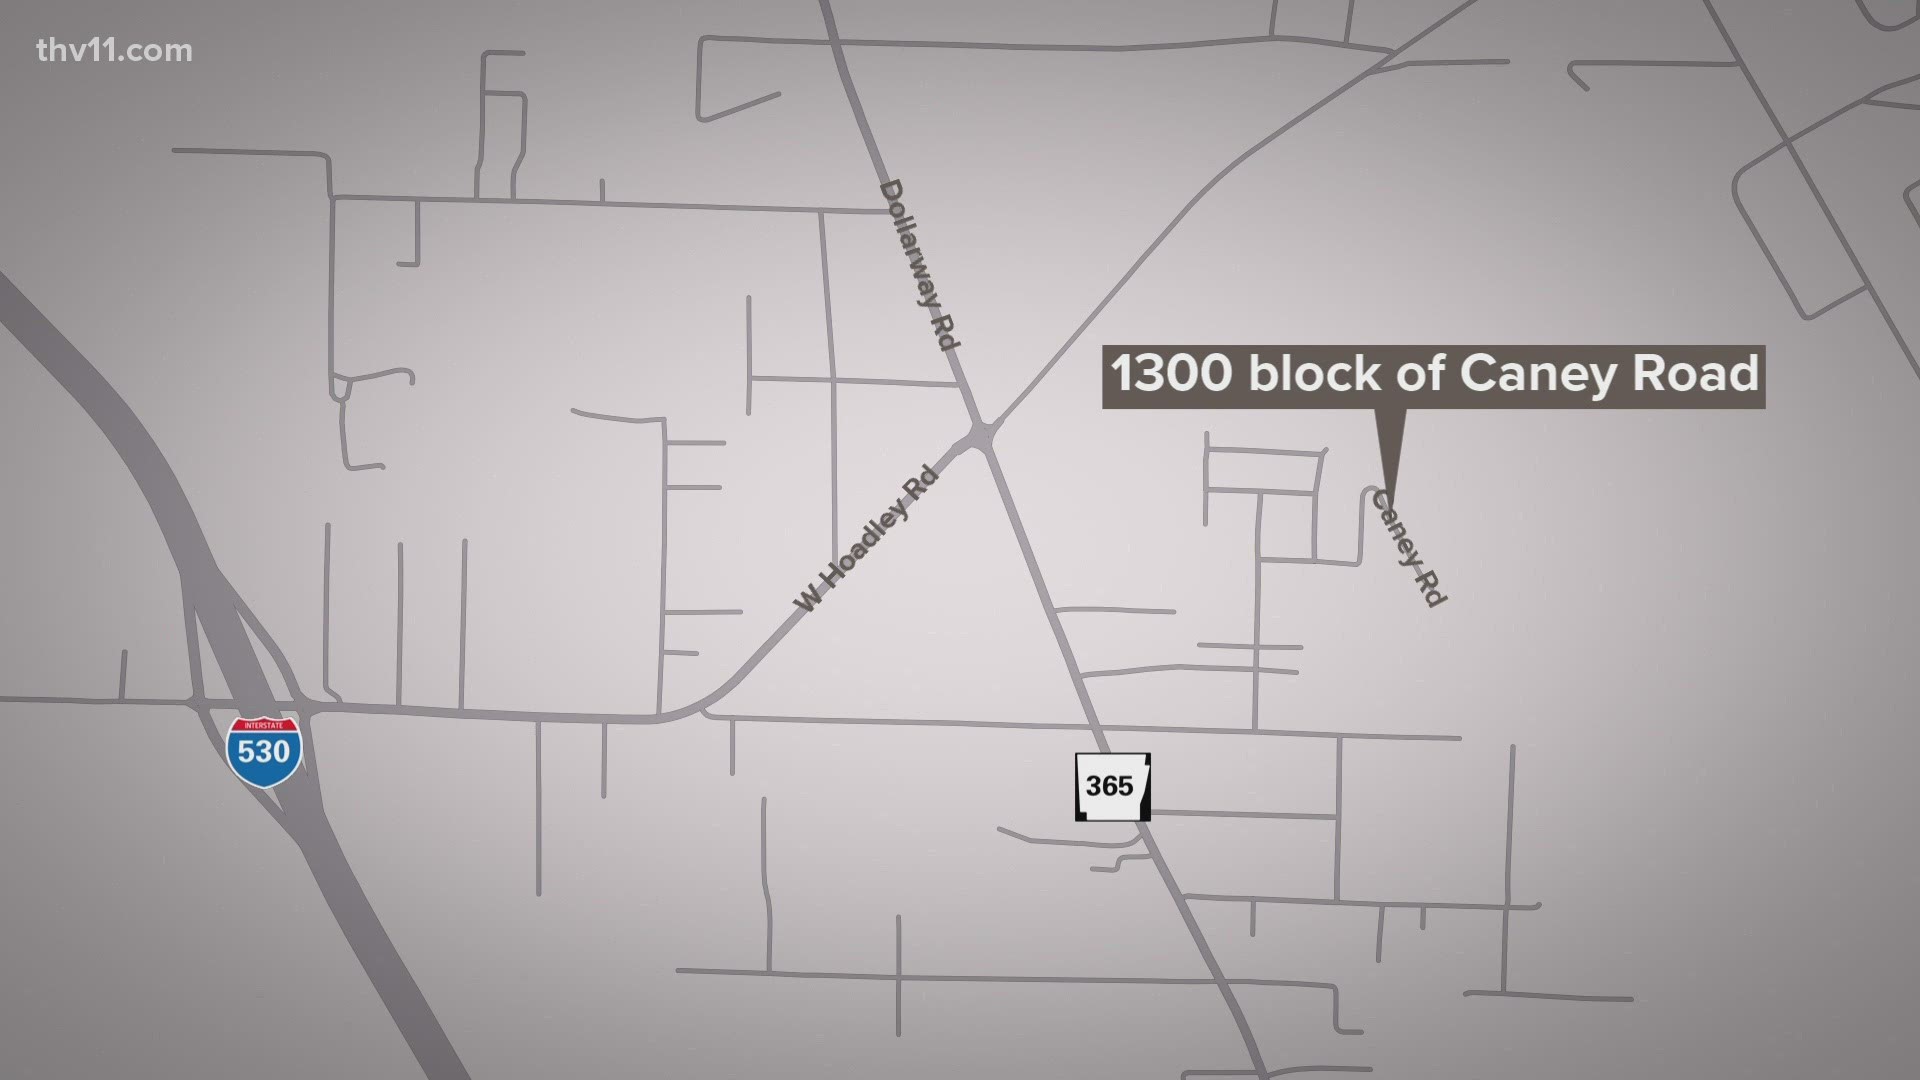 Jefferson cCunty deputies are investigating a homicide that occurred on Wednesday night.